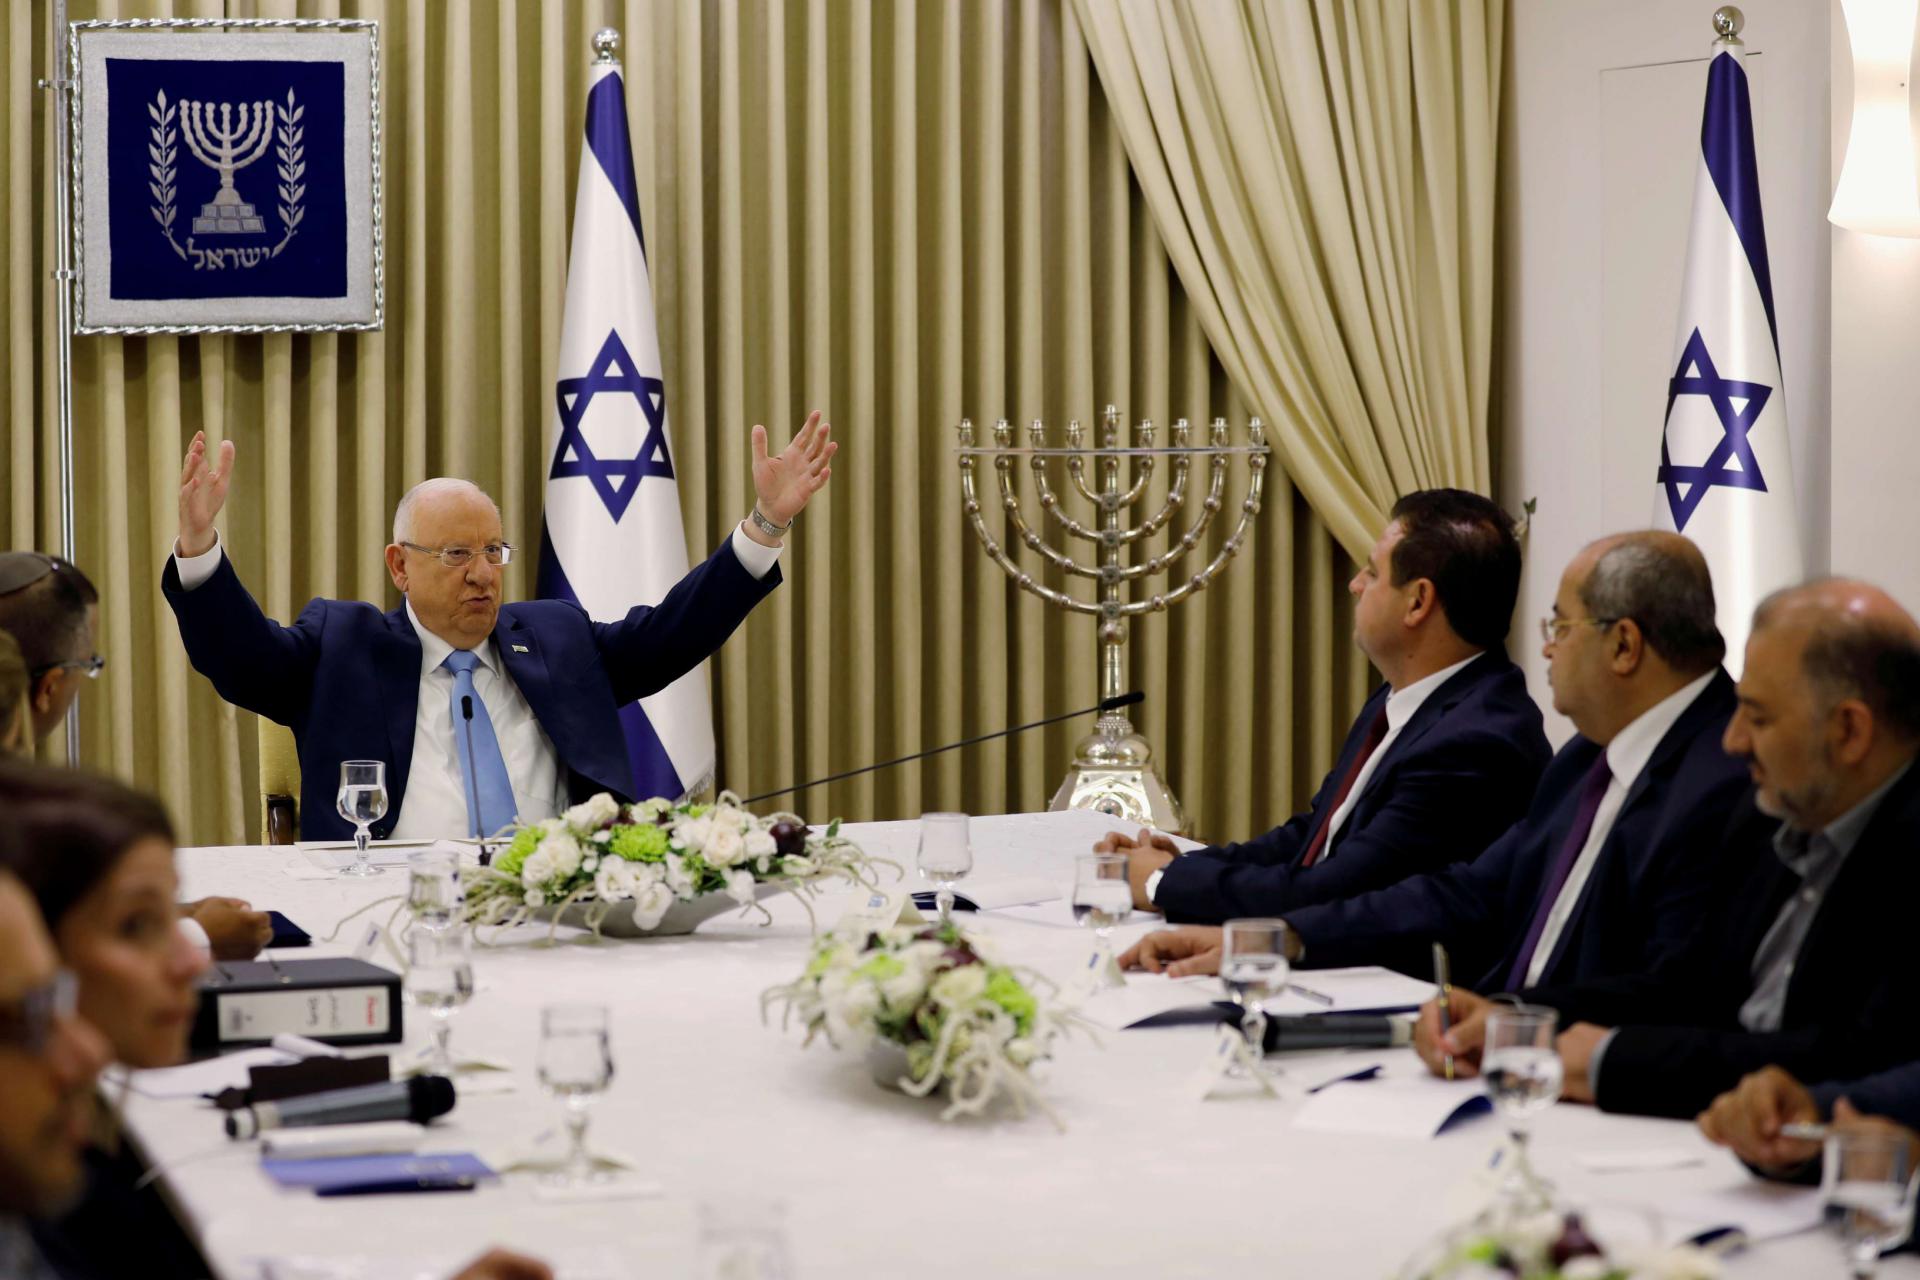 The two men are due to meet again with President Reuven Rivlin on Wednesday